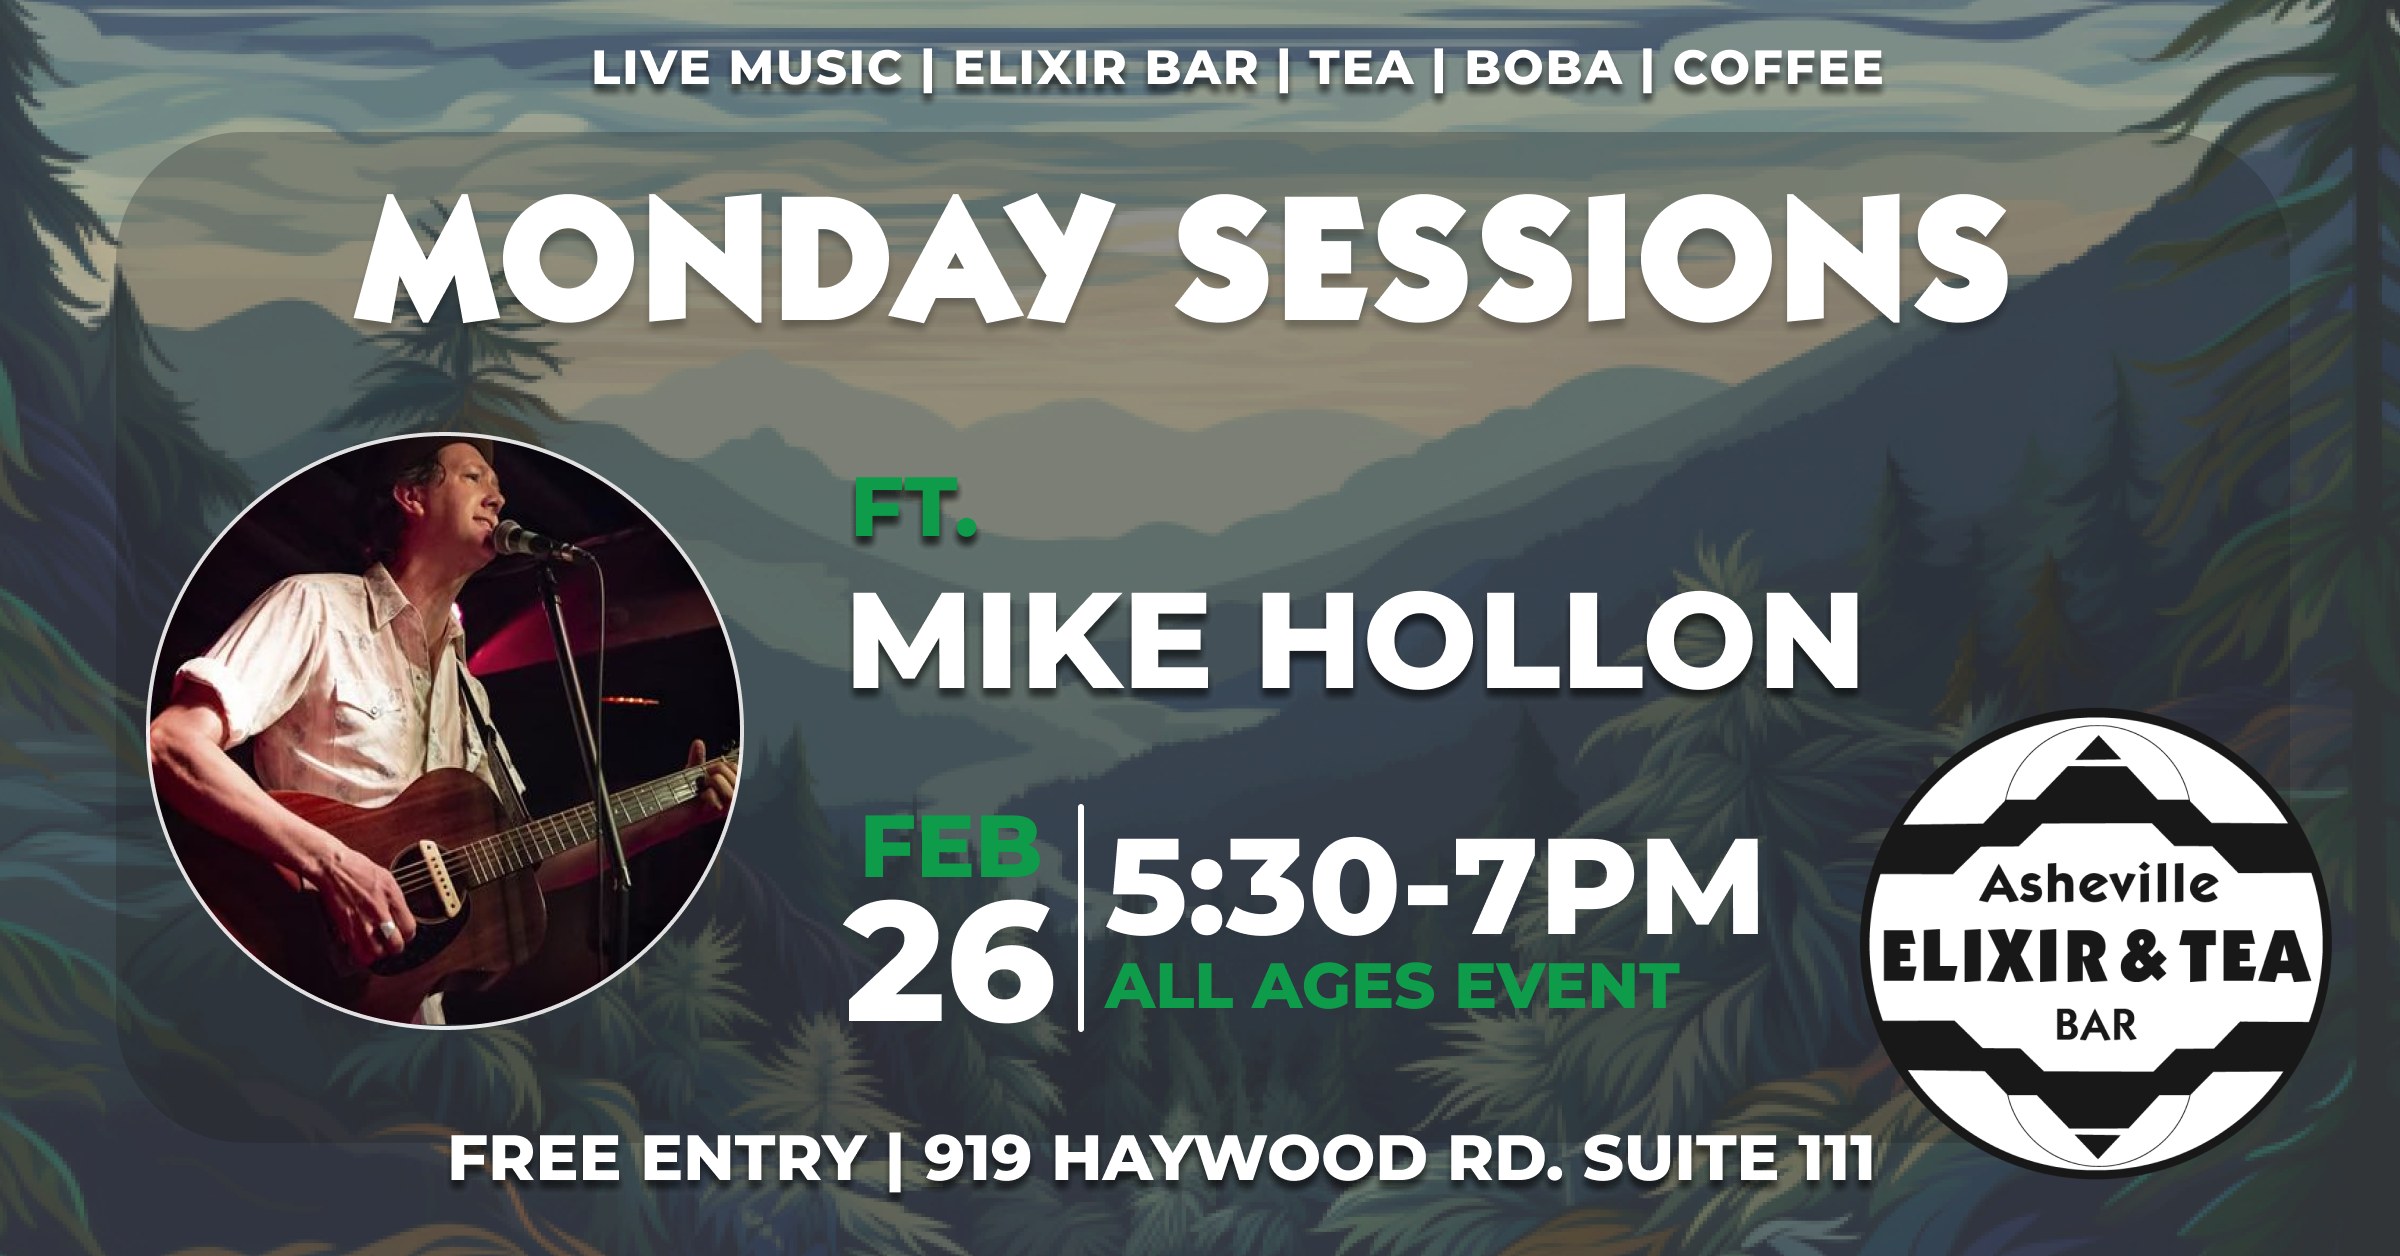 Monday Sessions ft. Mike Hollon